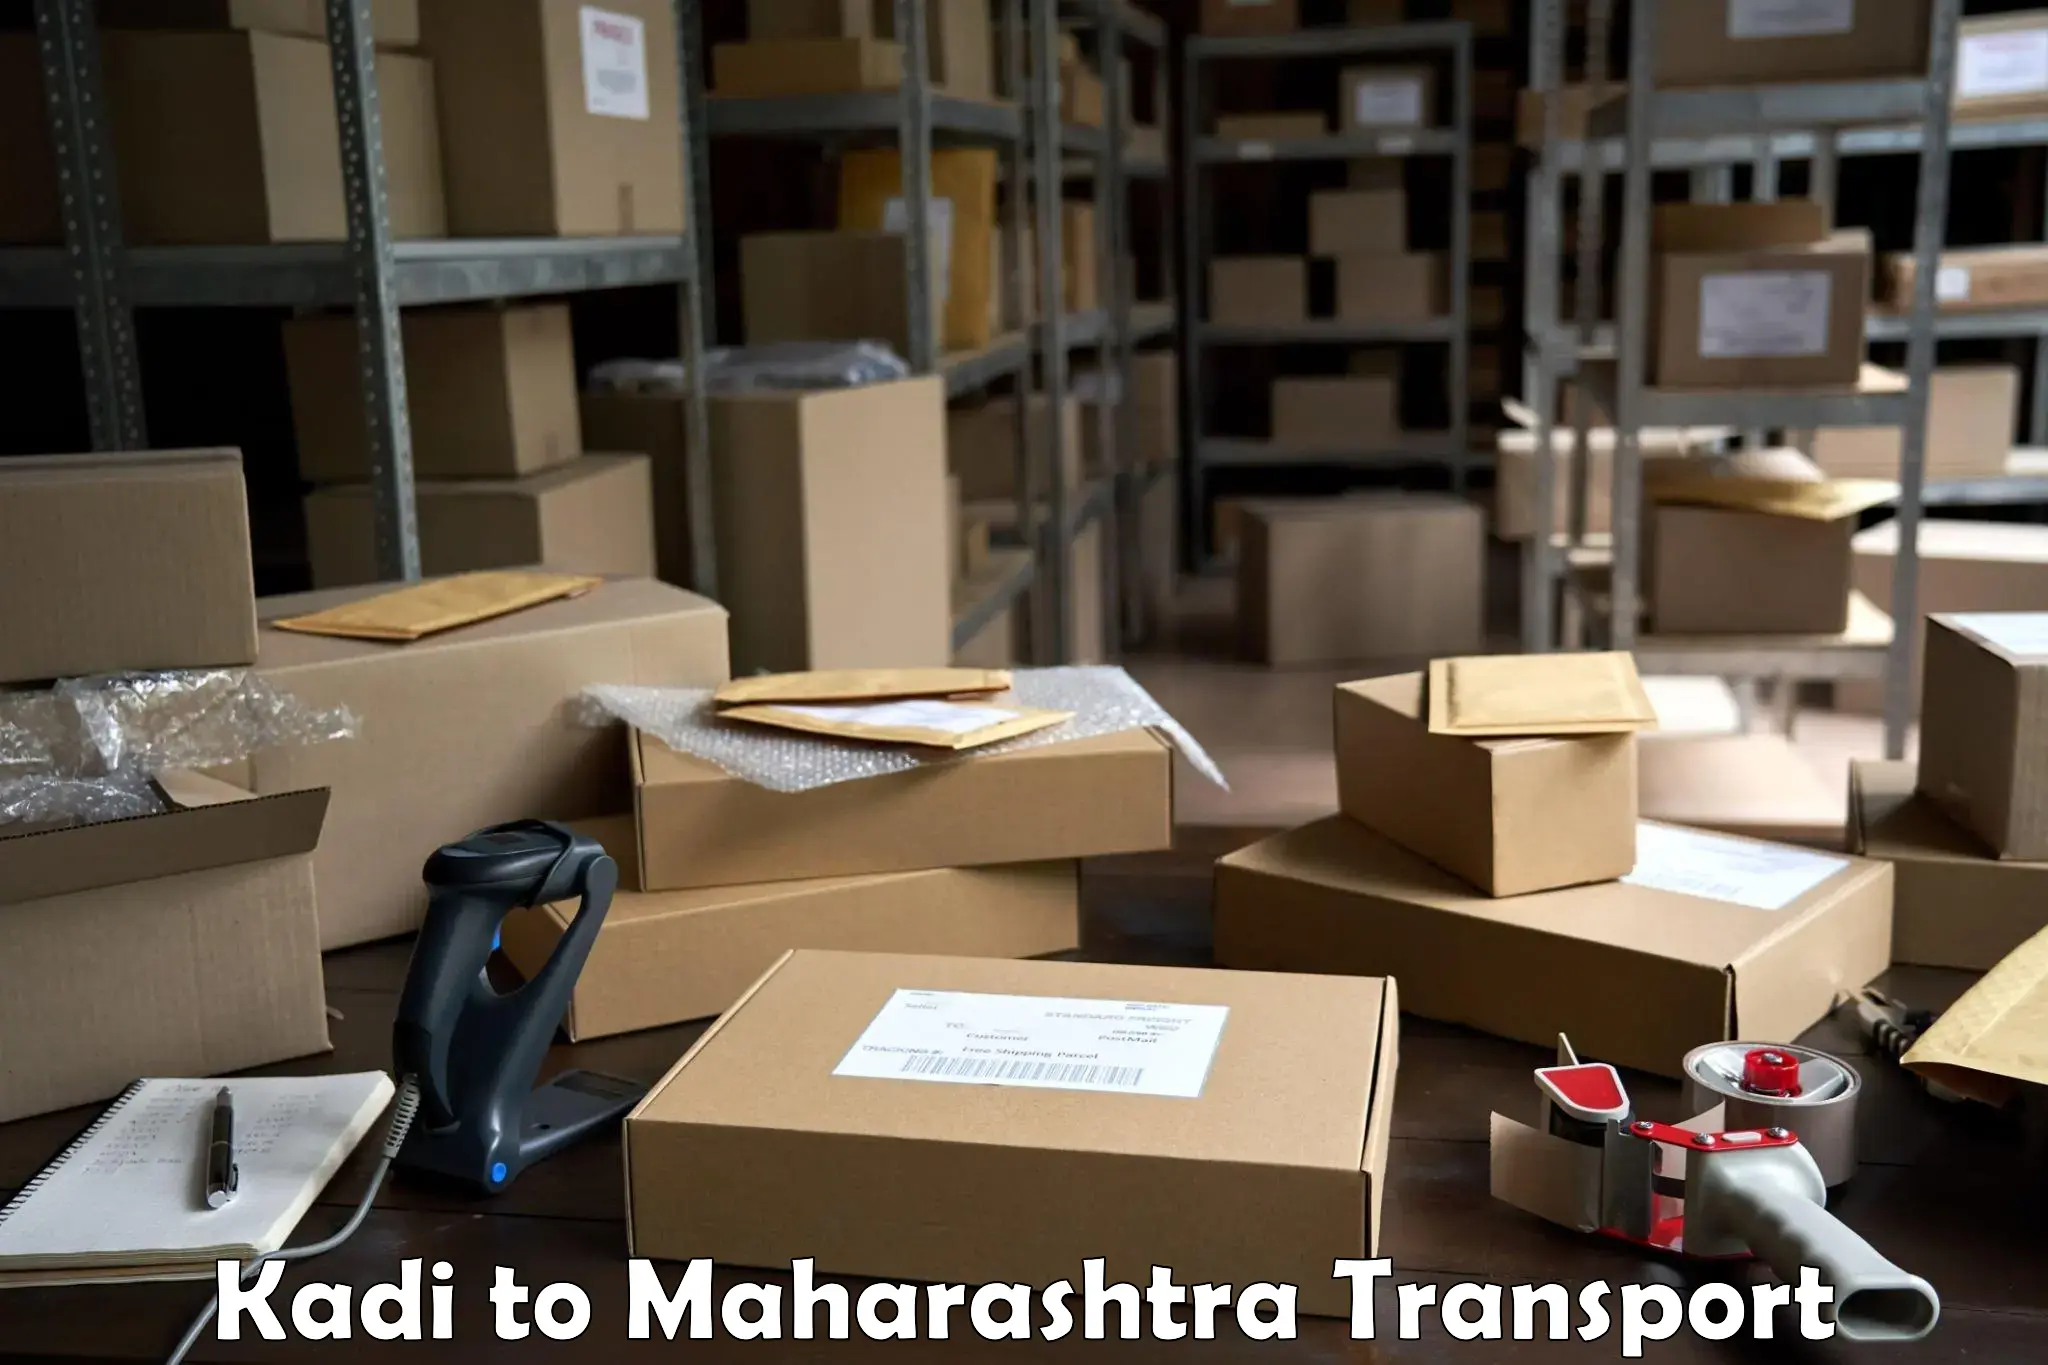 Logistics transportation services in Kadi to SVKMs Narsee Monjee Institute of Management Studies Mumbai